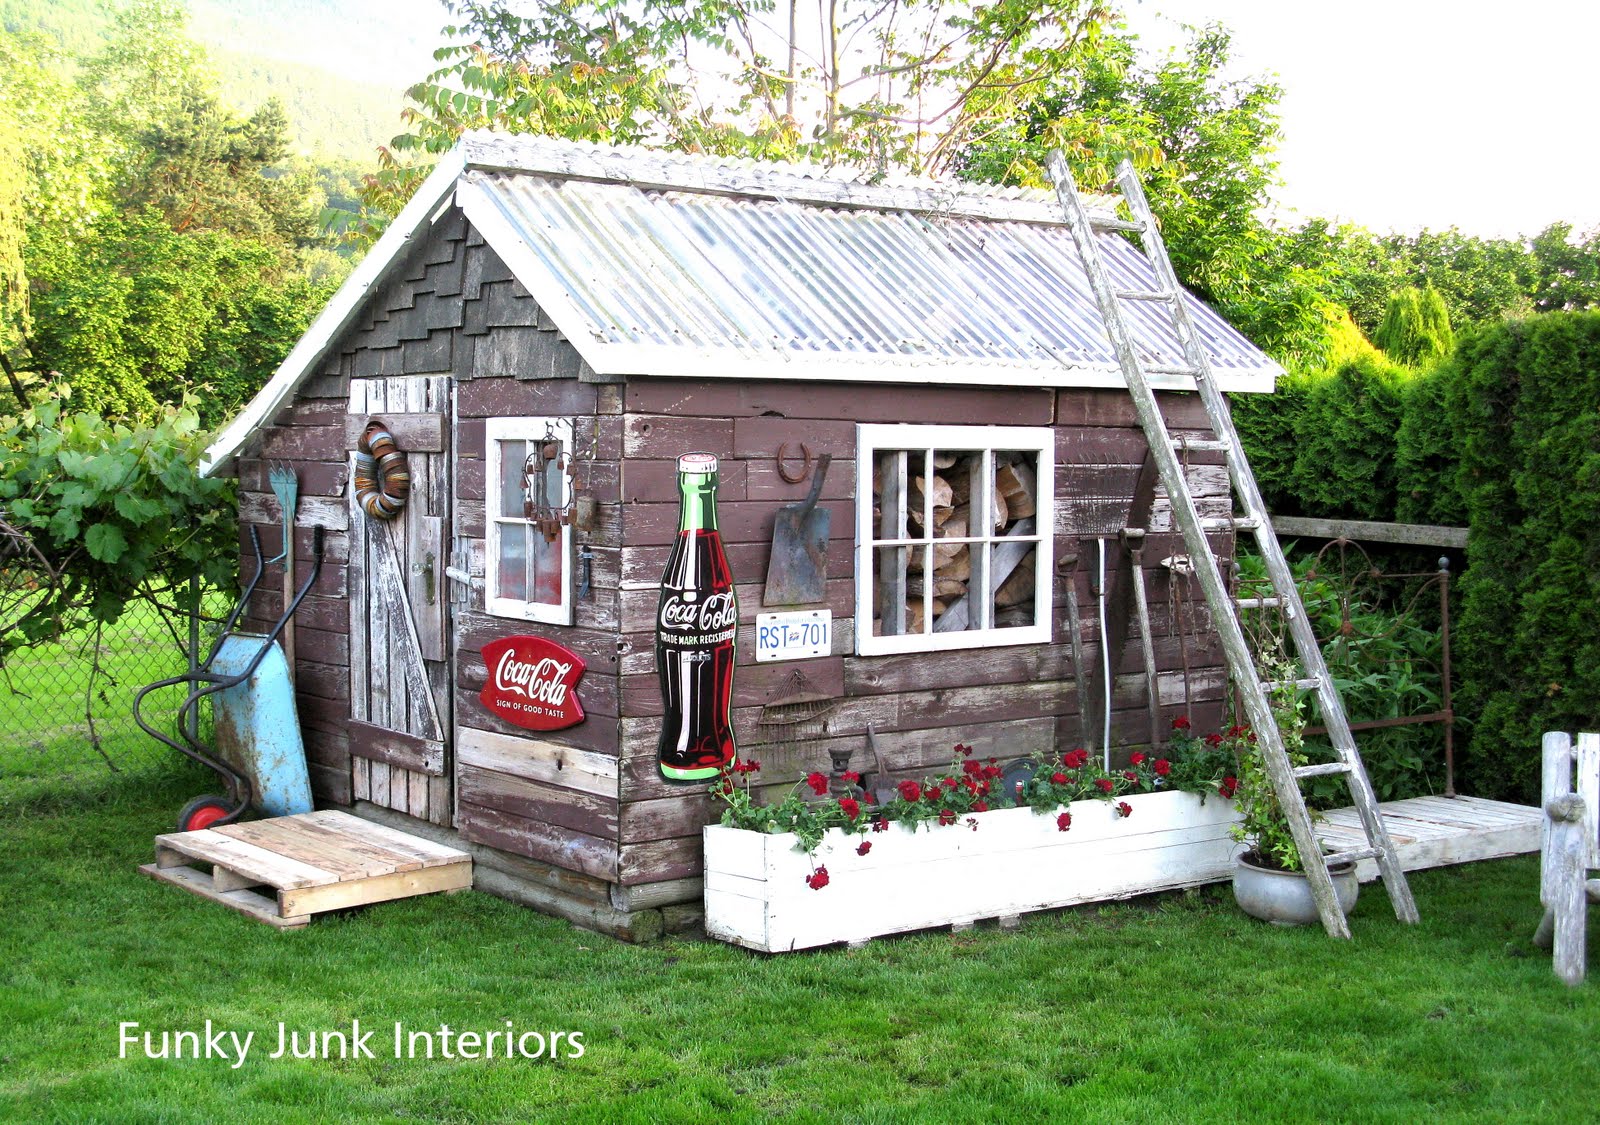 Decorating the great outdoors with junk for 'Gitter Done 